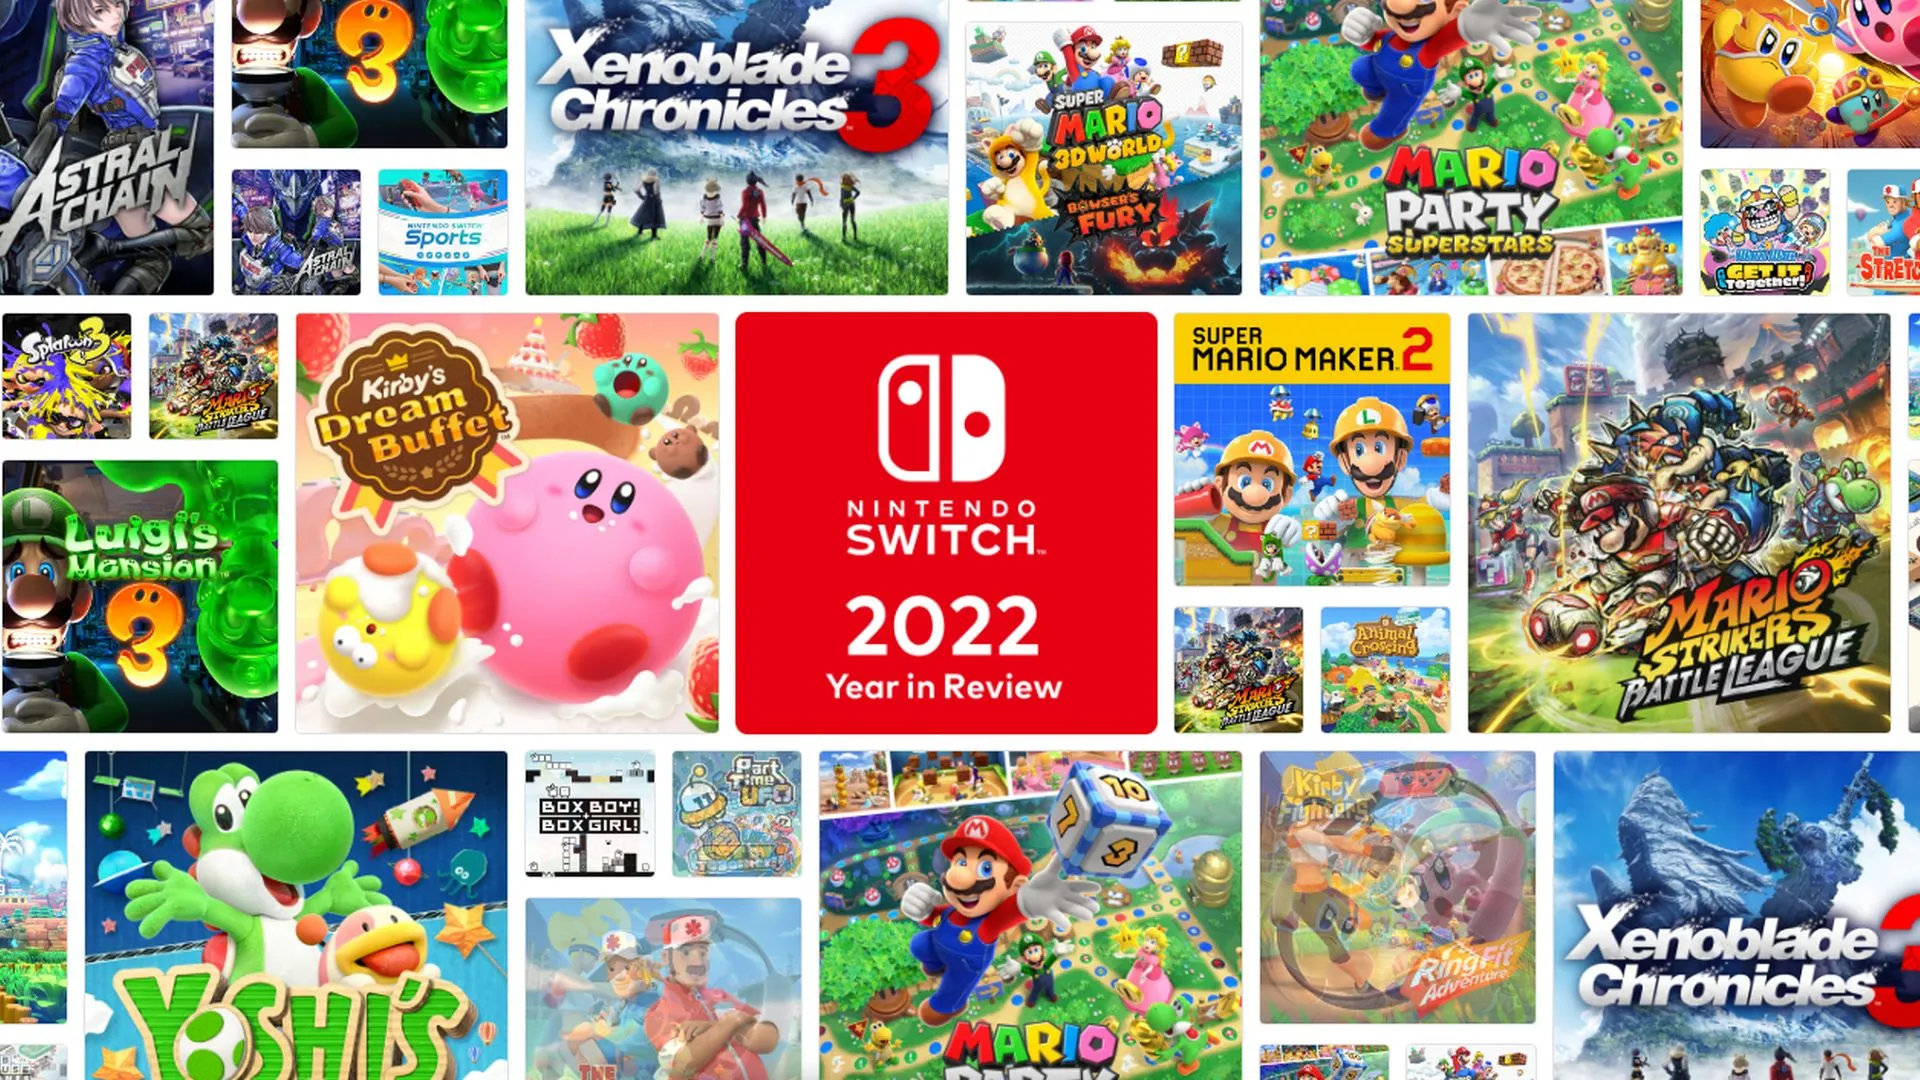 Nintendo Switch Year in Review 2022